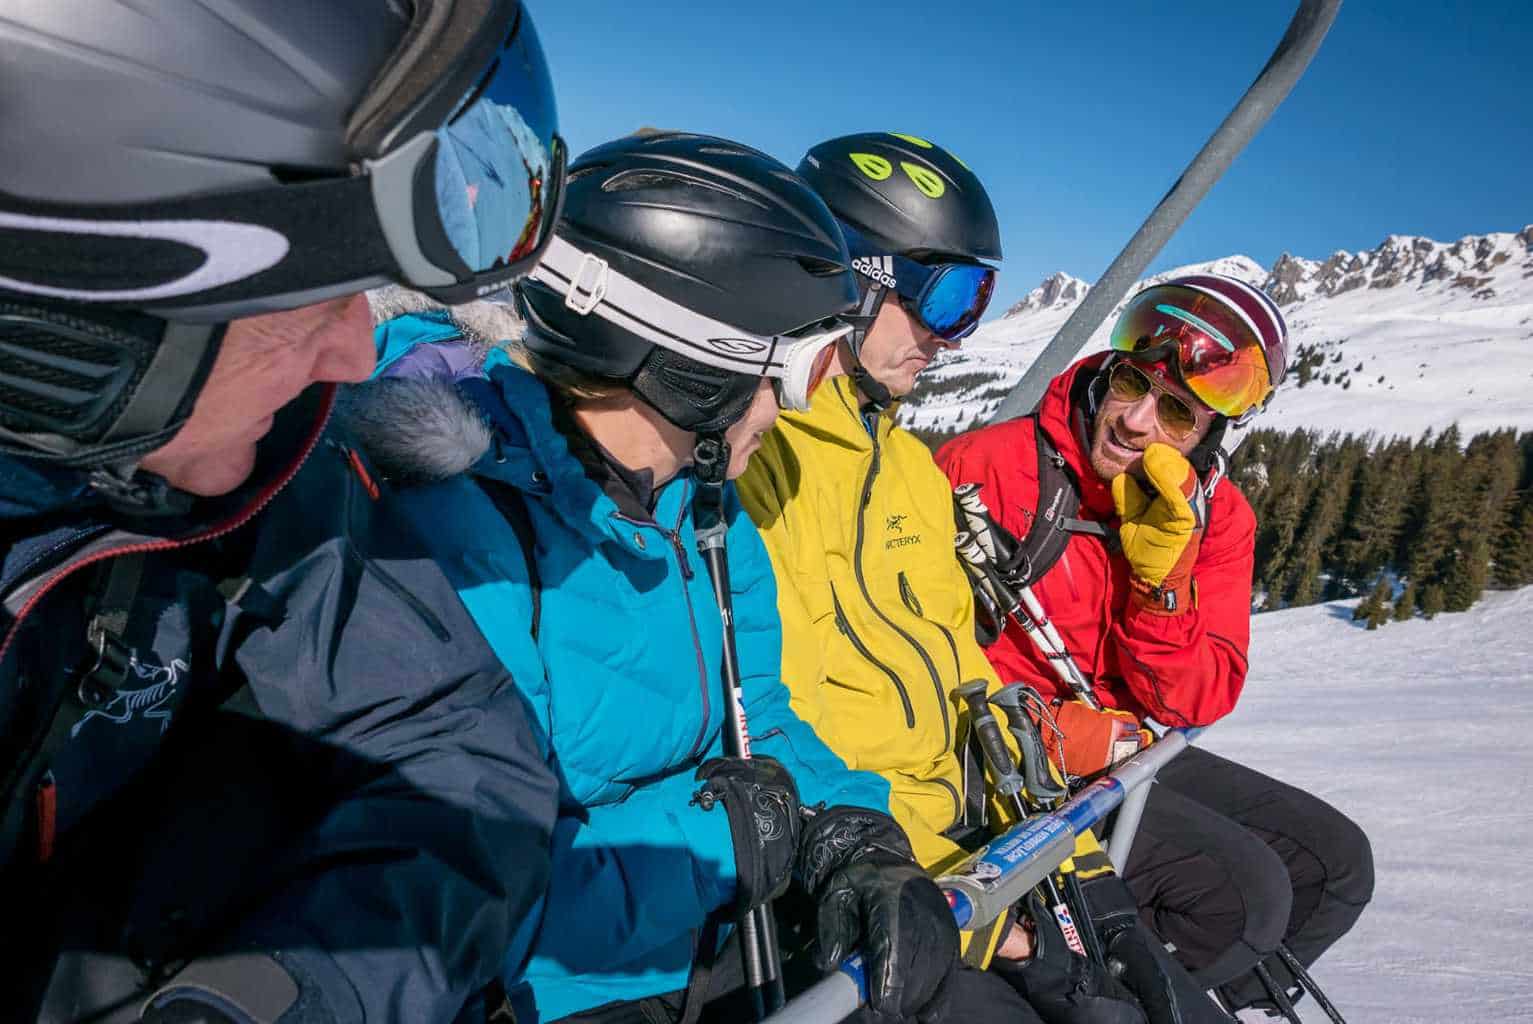 family chatting on chair lift